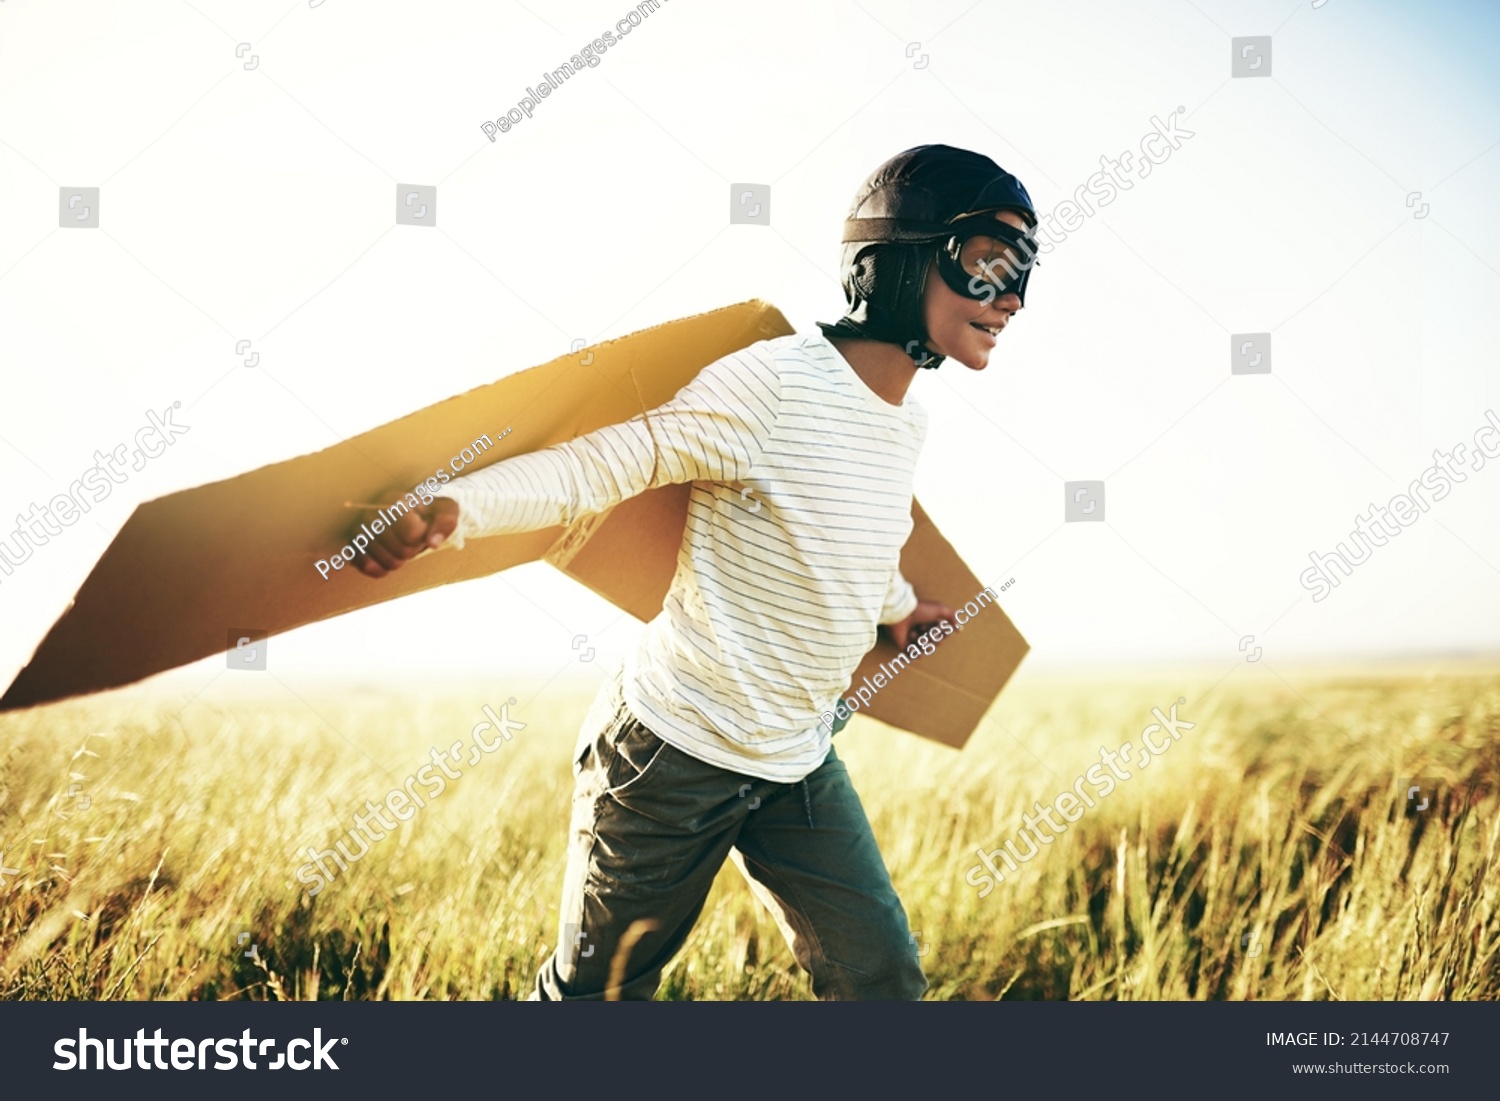 Ready for lift off. Shot of a young boy pretending to fly with a pair of cardboard wings in an open field. #2144708747